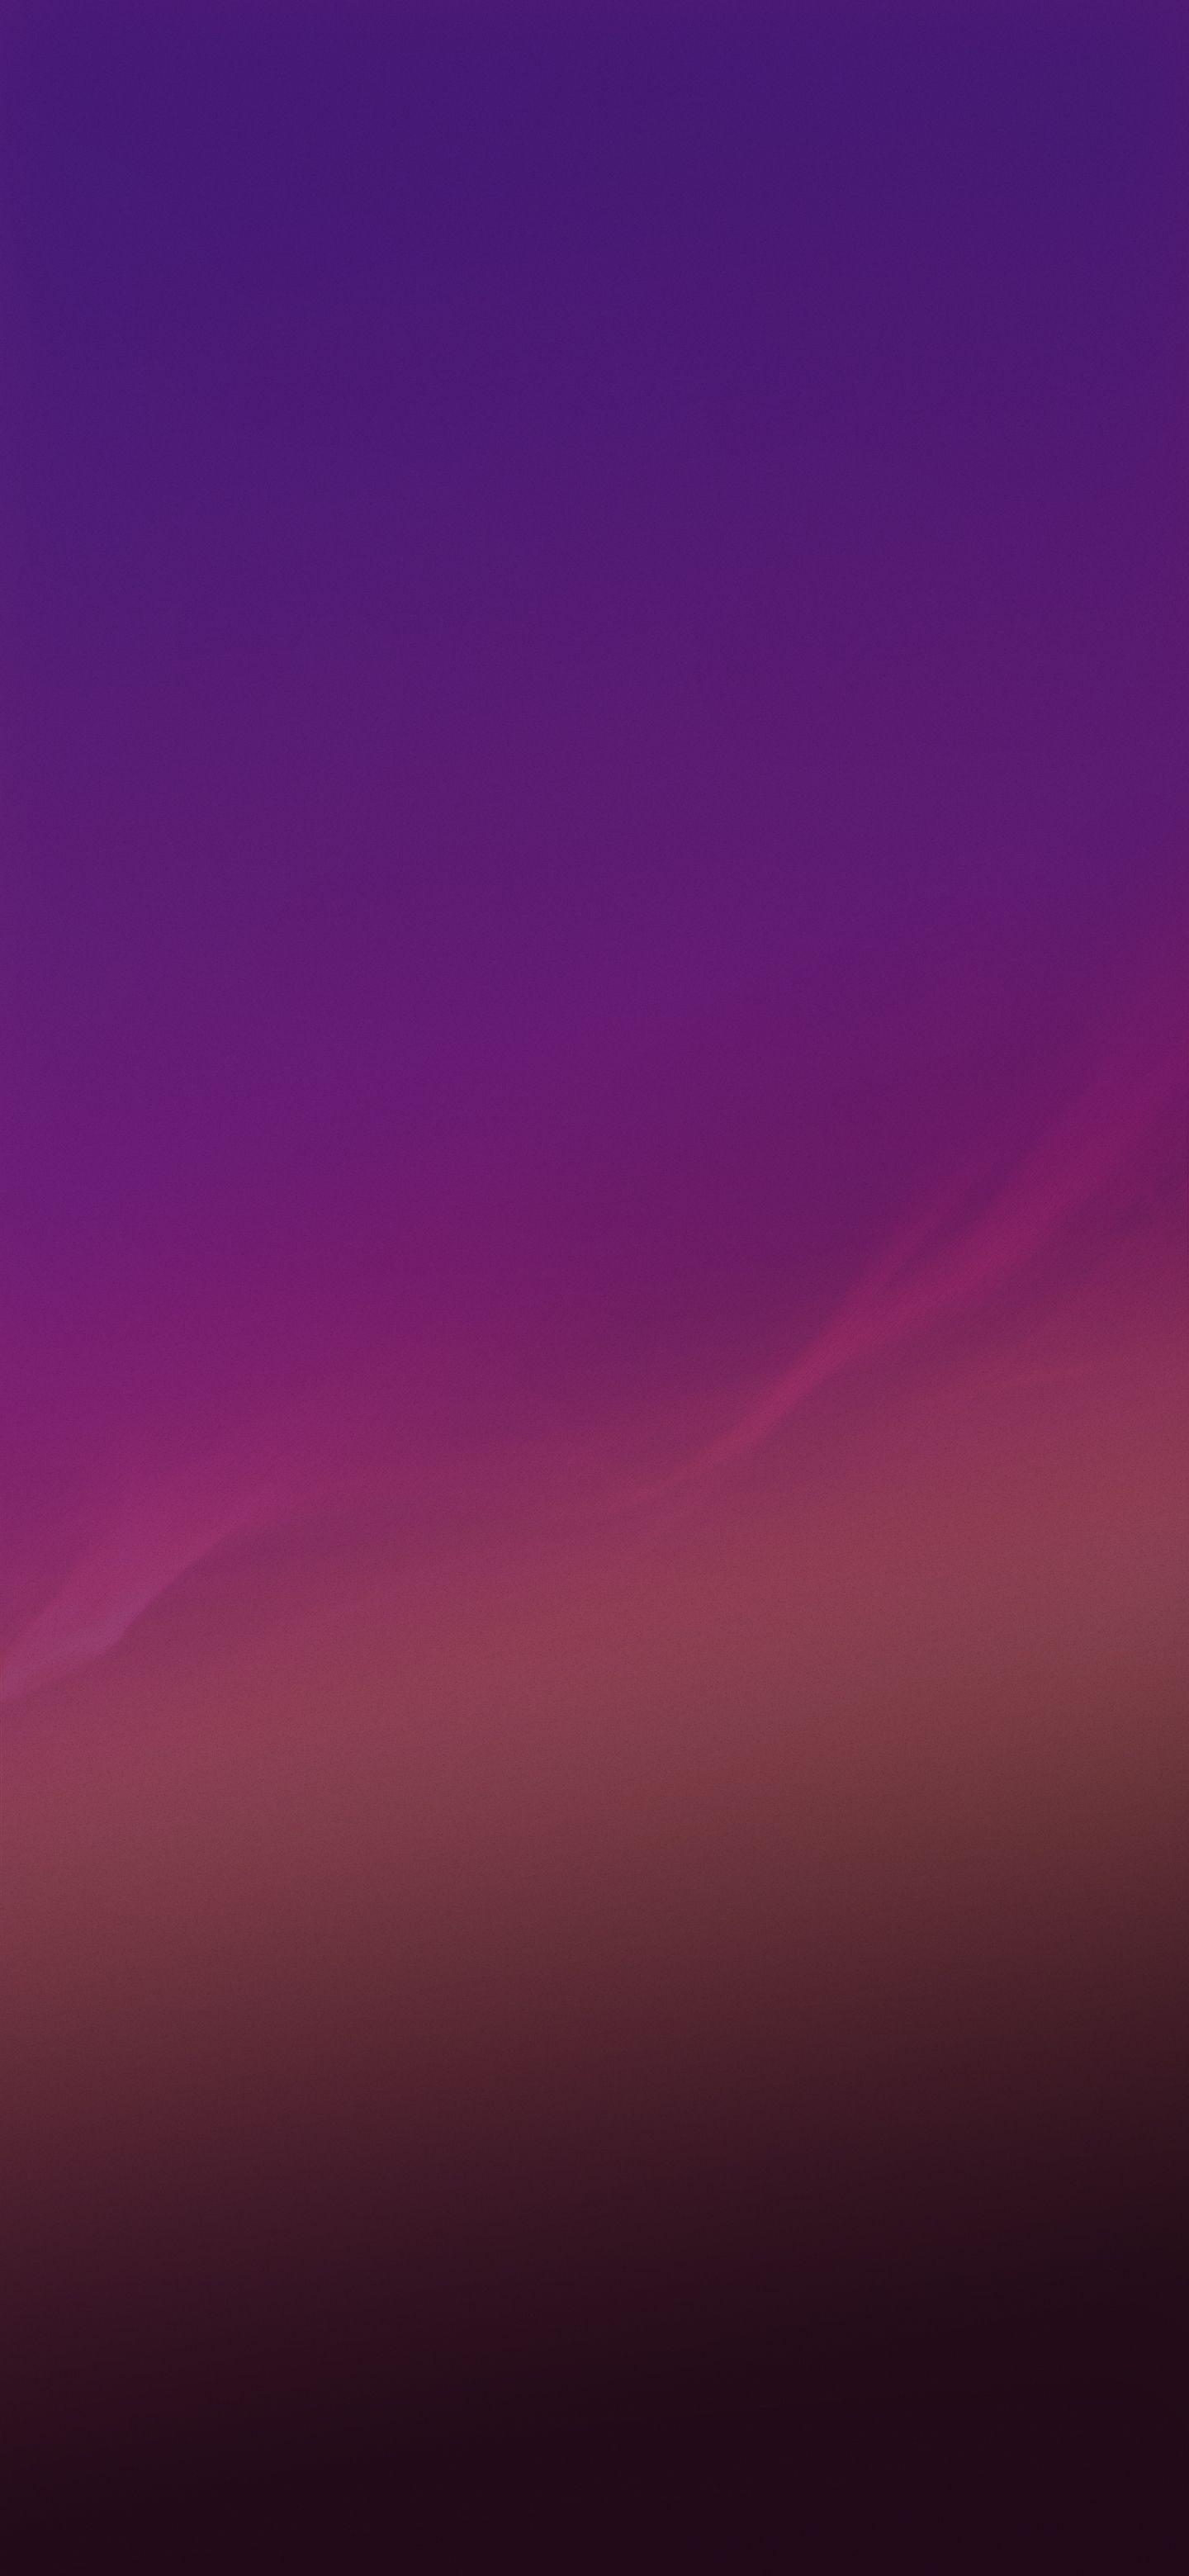 Lg G8 Wallpapers